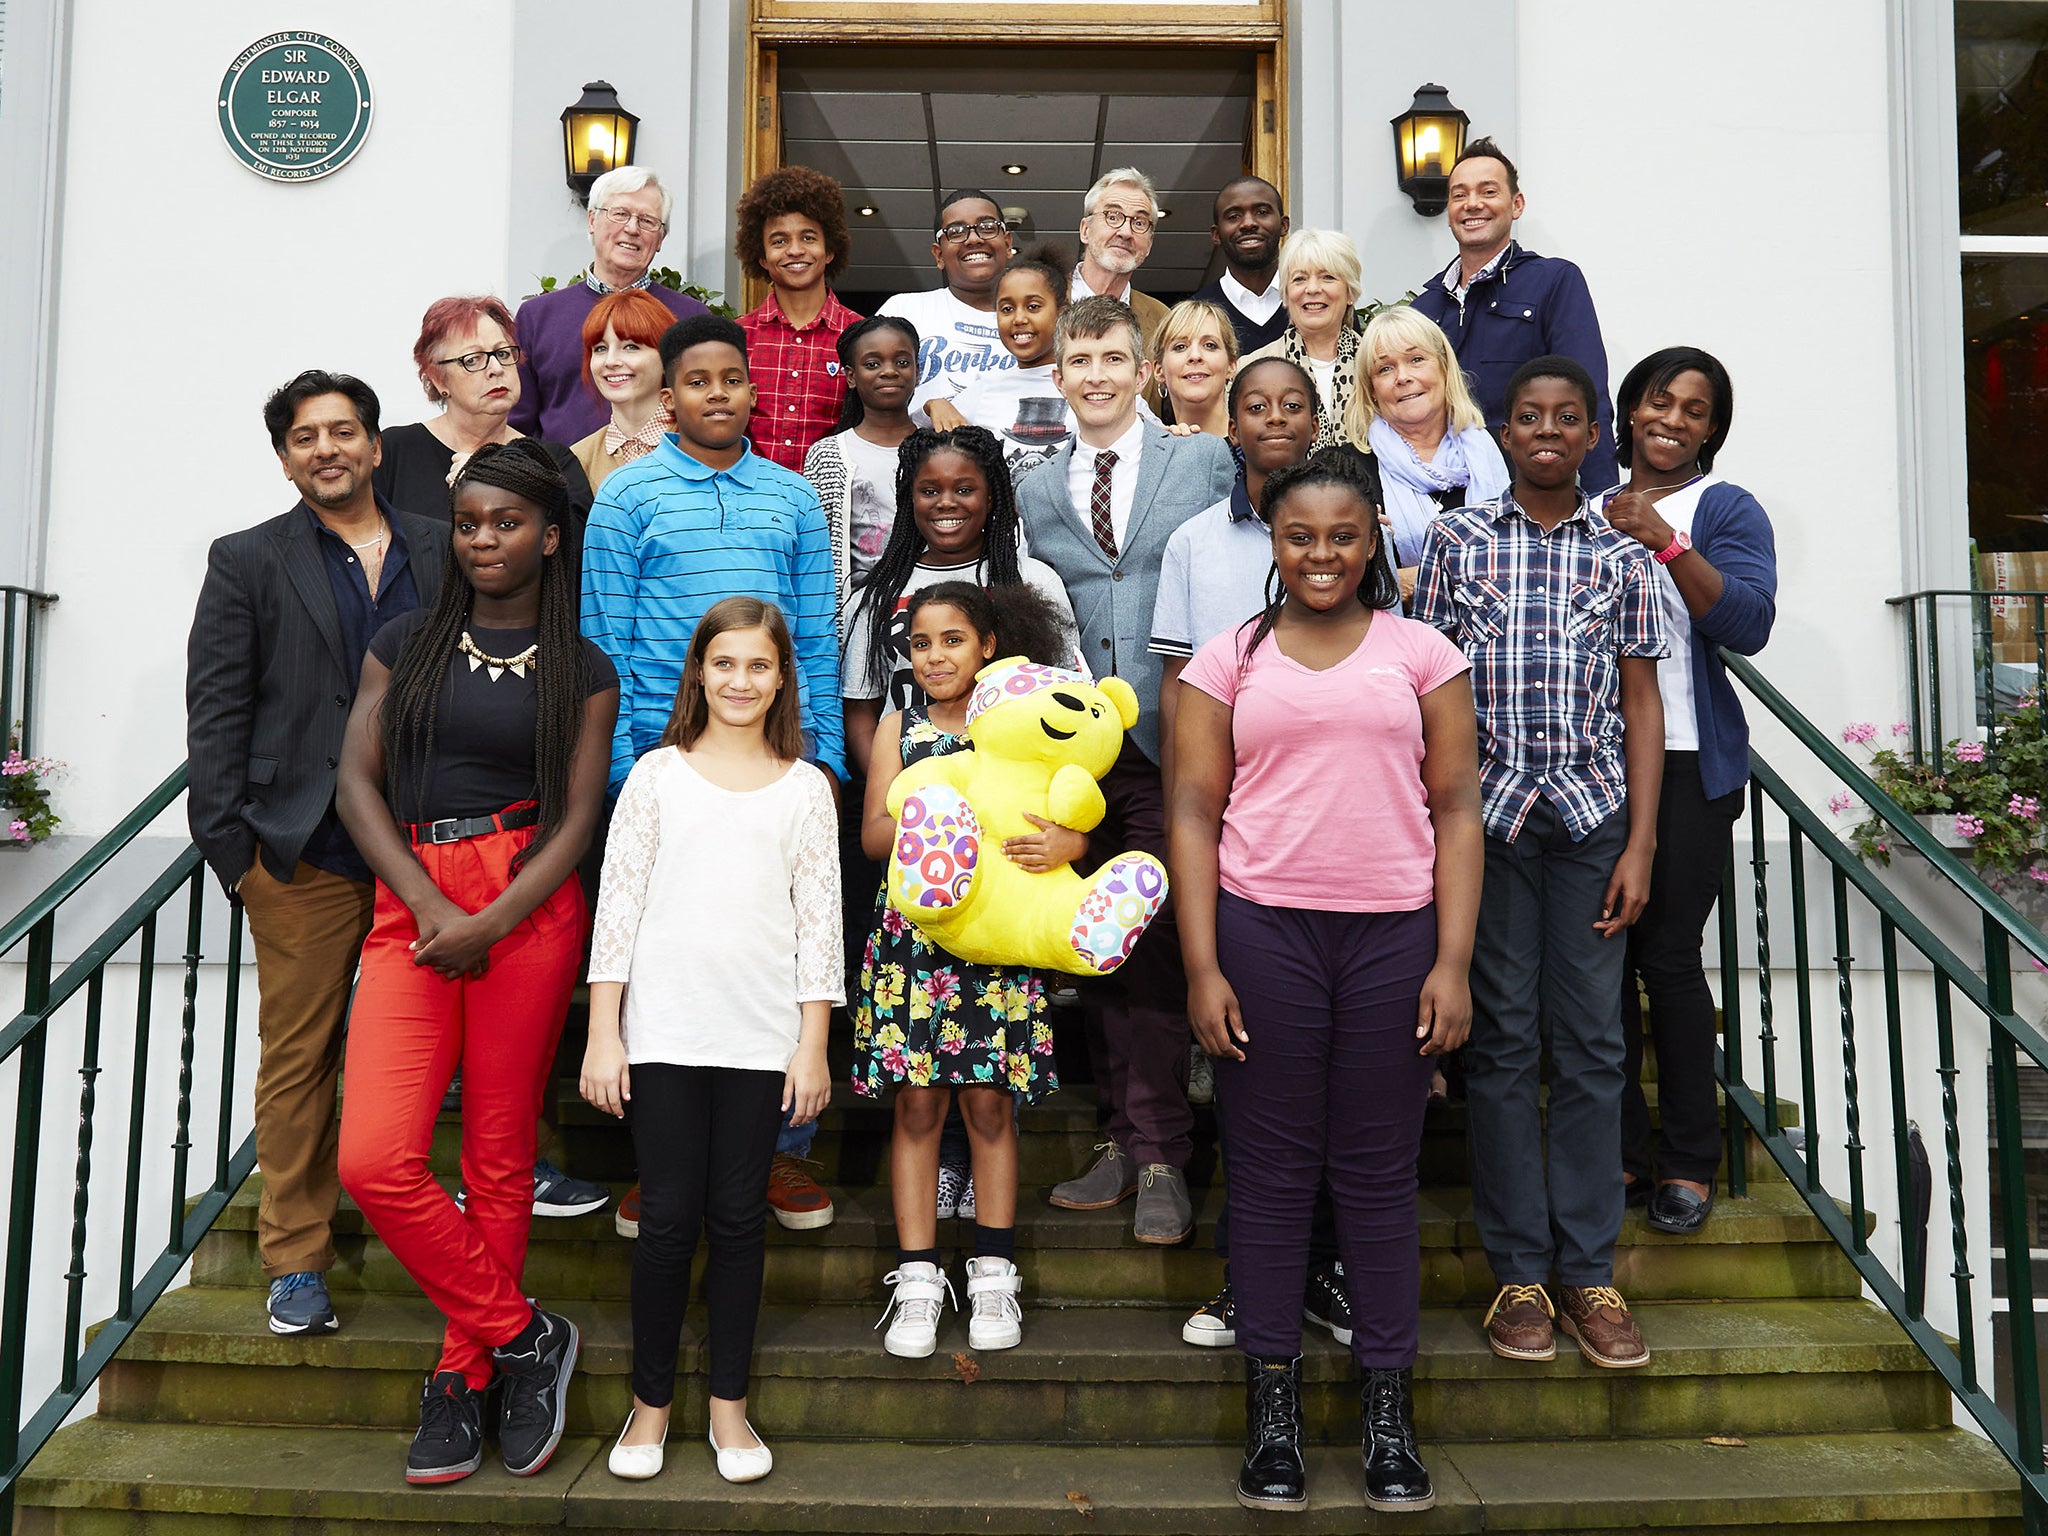 Gareth Malone's All Star Choir who will sing the official Children in Need single